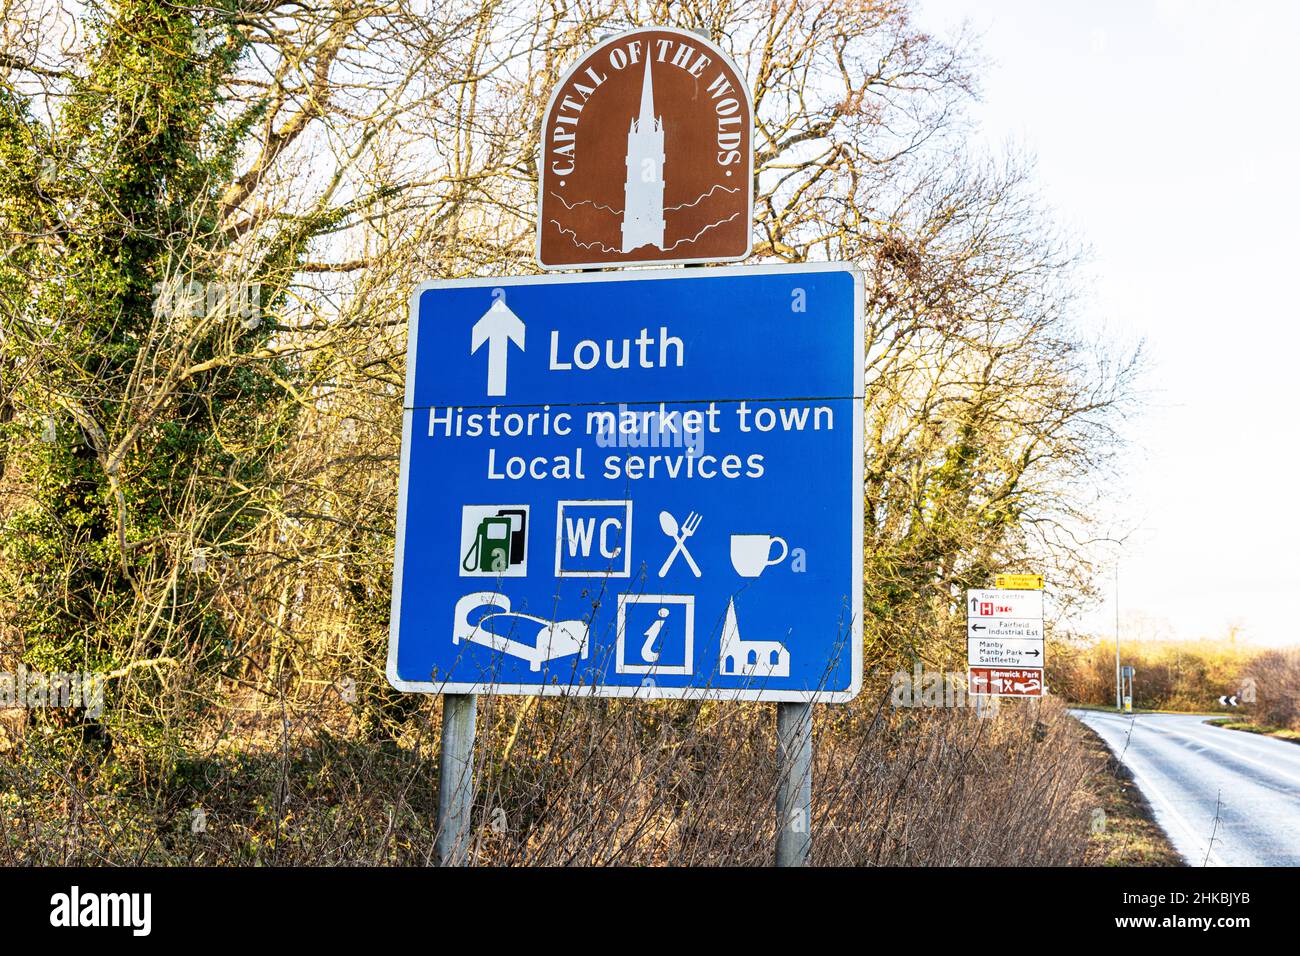 Louth in Lincolnshire, UK., Louth signo de bienvenida welcom signos, twined with sign, Louth UK, UK, England, Lincolnshire, Louth Lincolnshire, señal, bienvenida, Foto de stock